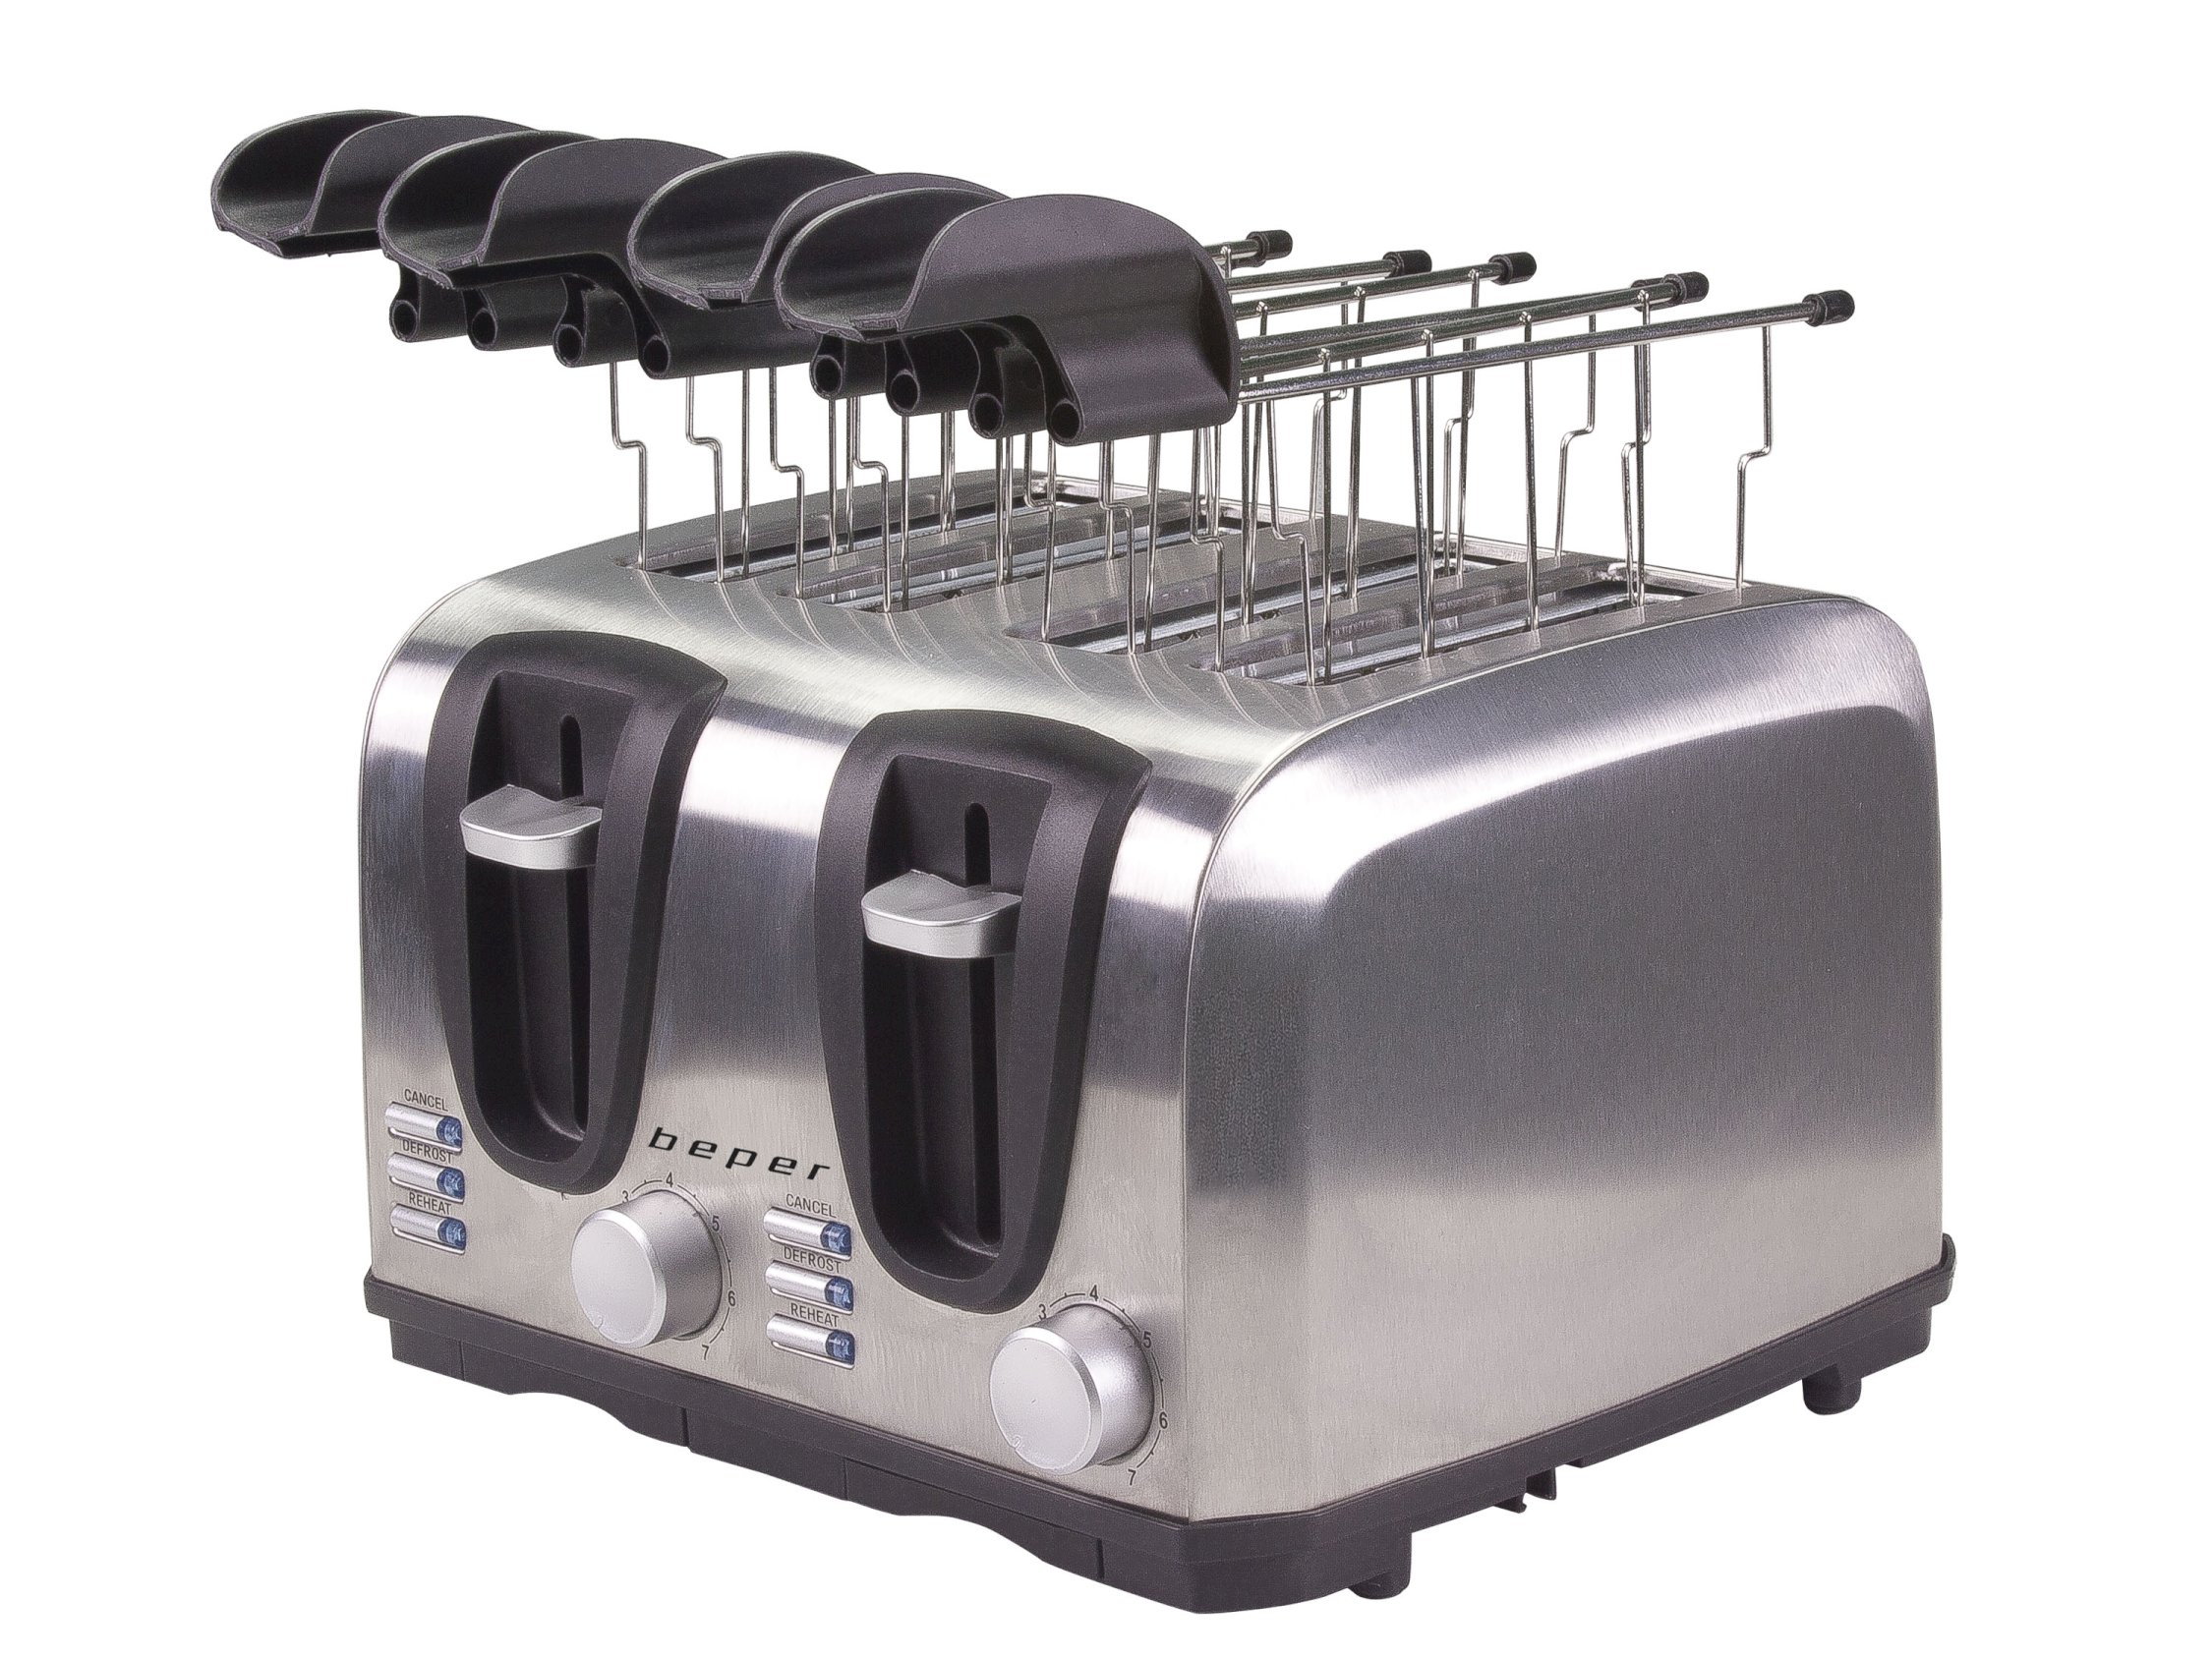 BT.050, toaster, 4 pliers, 1400W, stainless steel